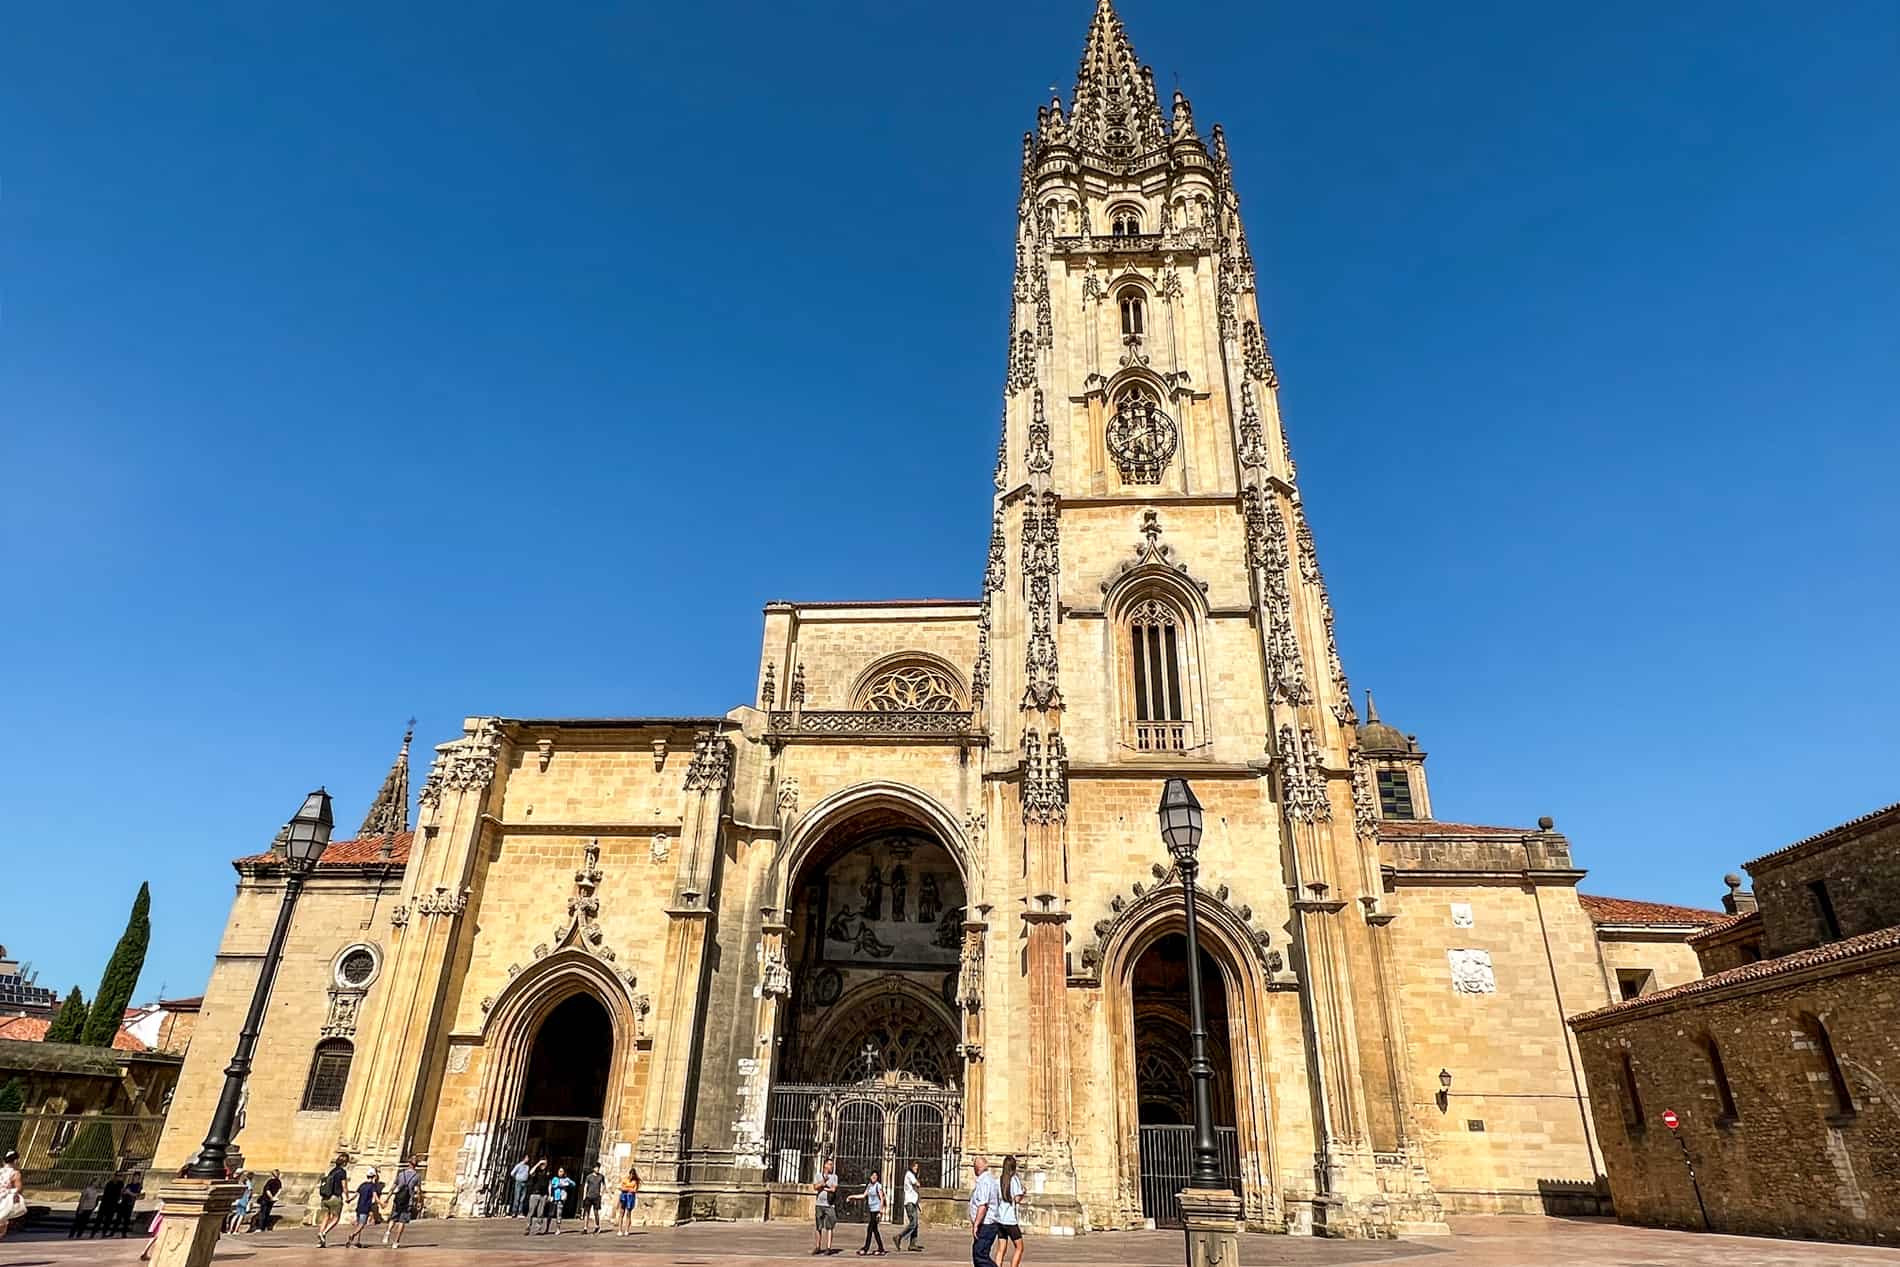 The striking, single-tower San Salvador Cathedral in Oviedo stands at the front of a large public square.